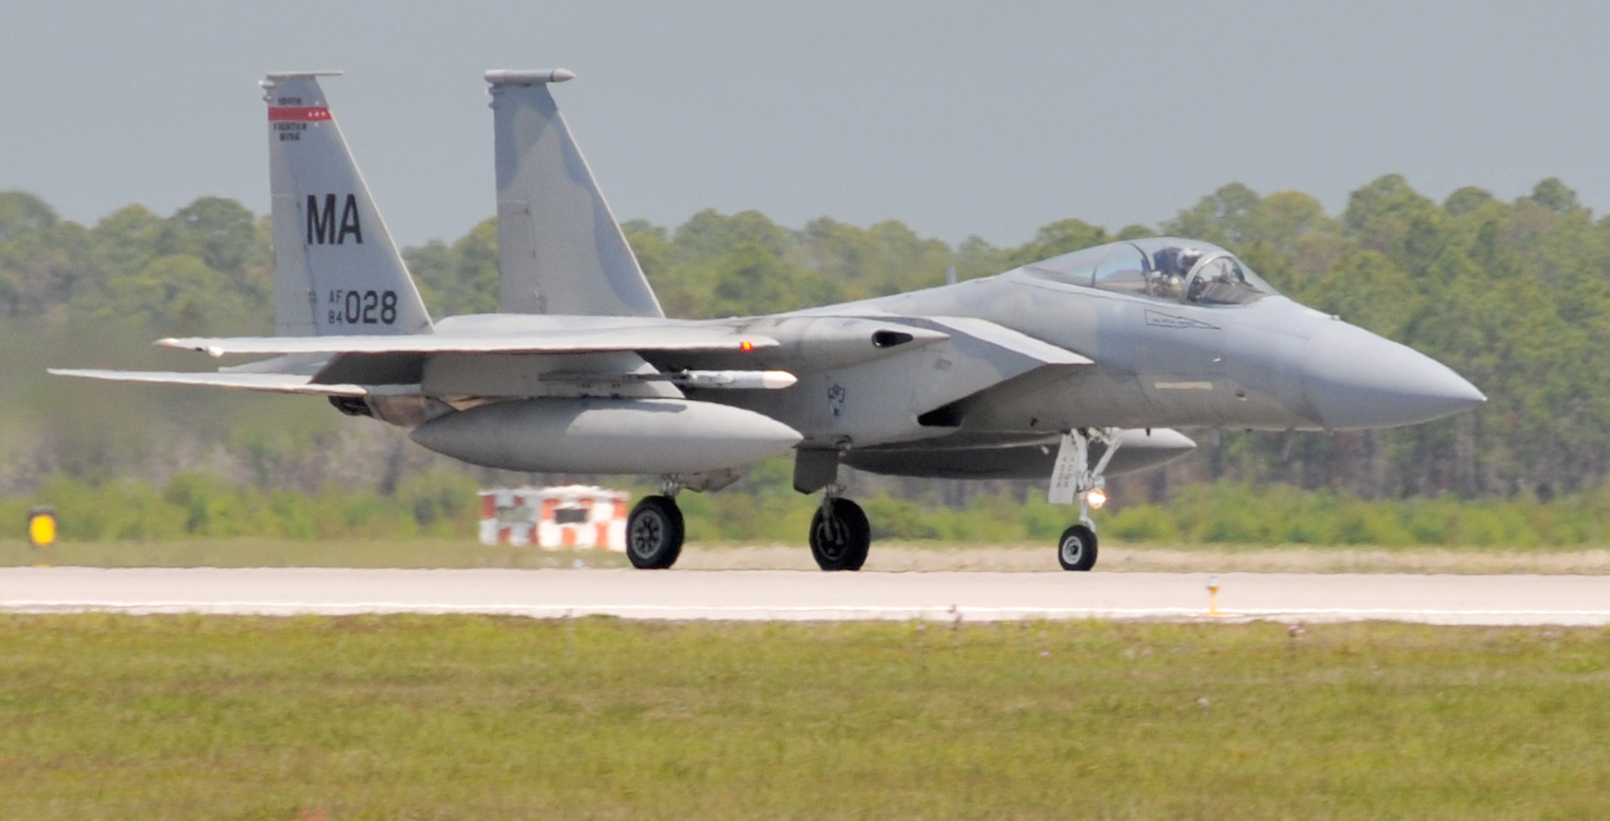 F-15 Eagles from the 104th Fighter Wing, Massachusetts Air National Guard arrive at Tyndall Air Force Base in Florida in 2011. US Air Force Photo